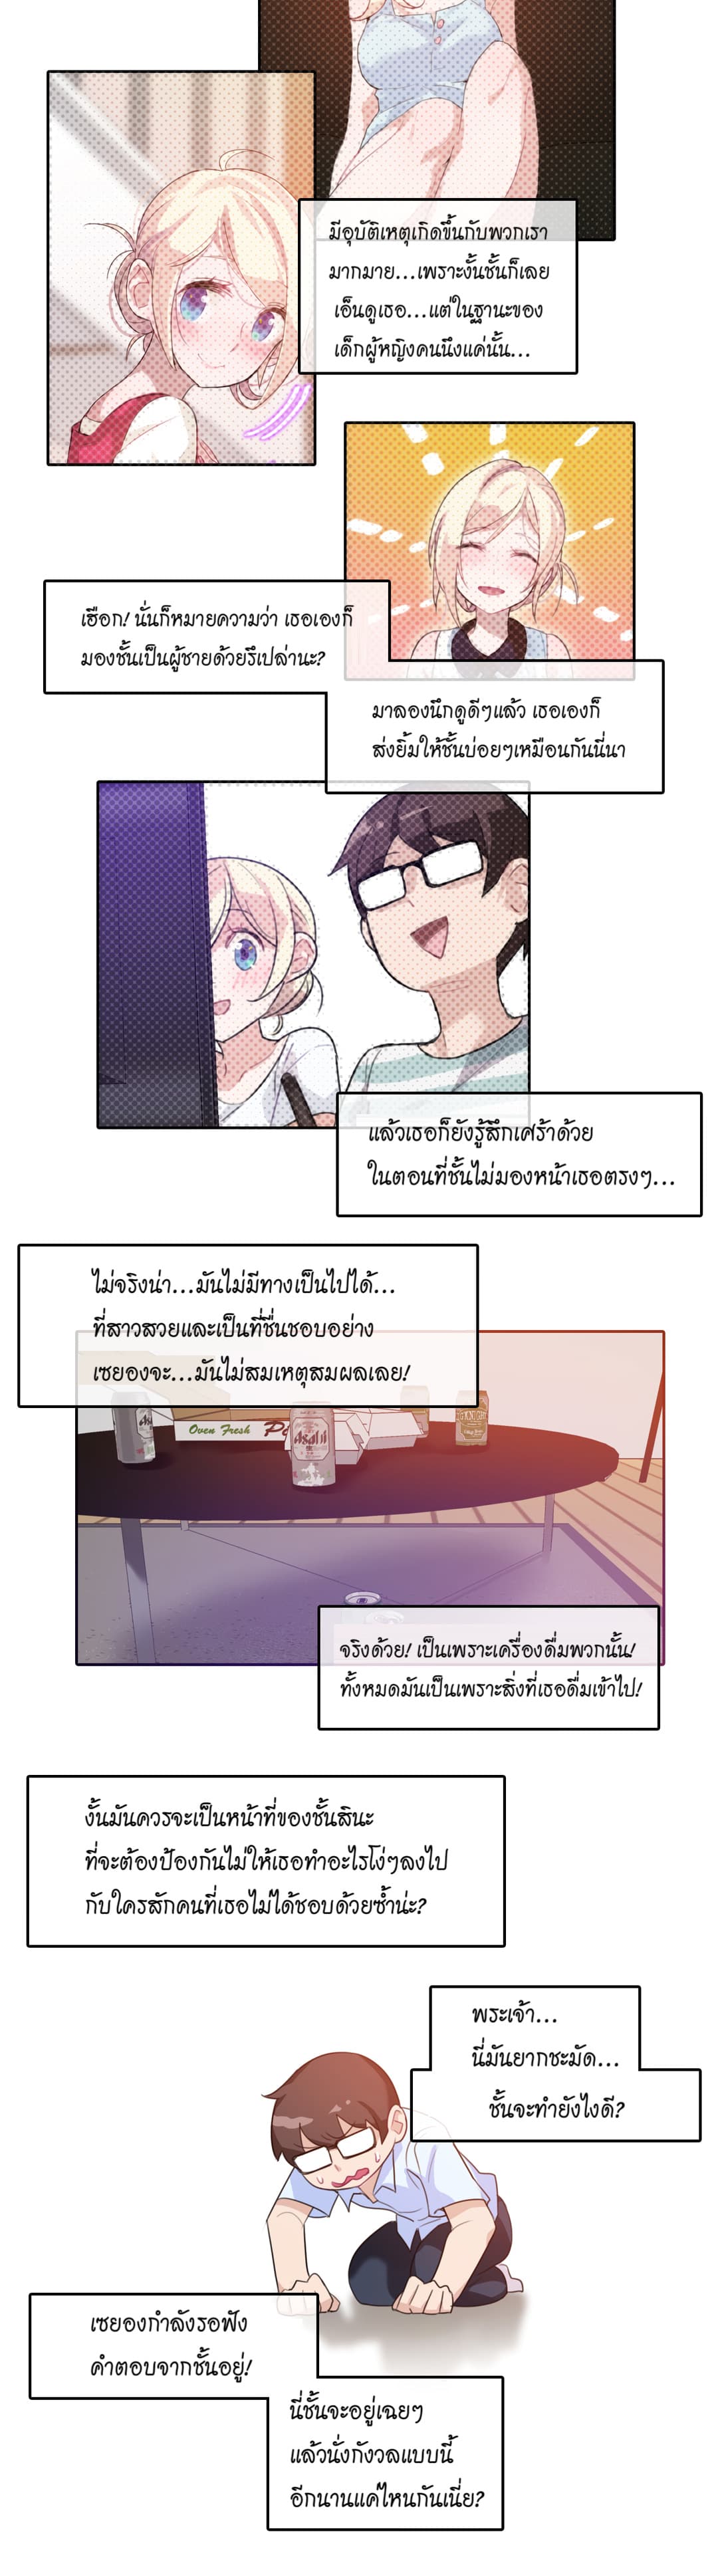 A Pervert’s Daily Life 10 (10)